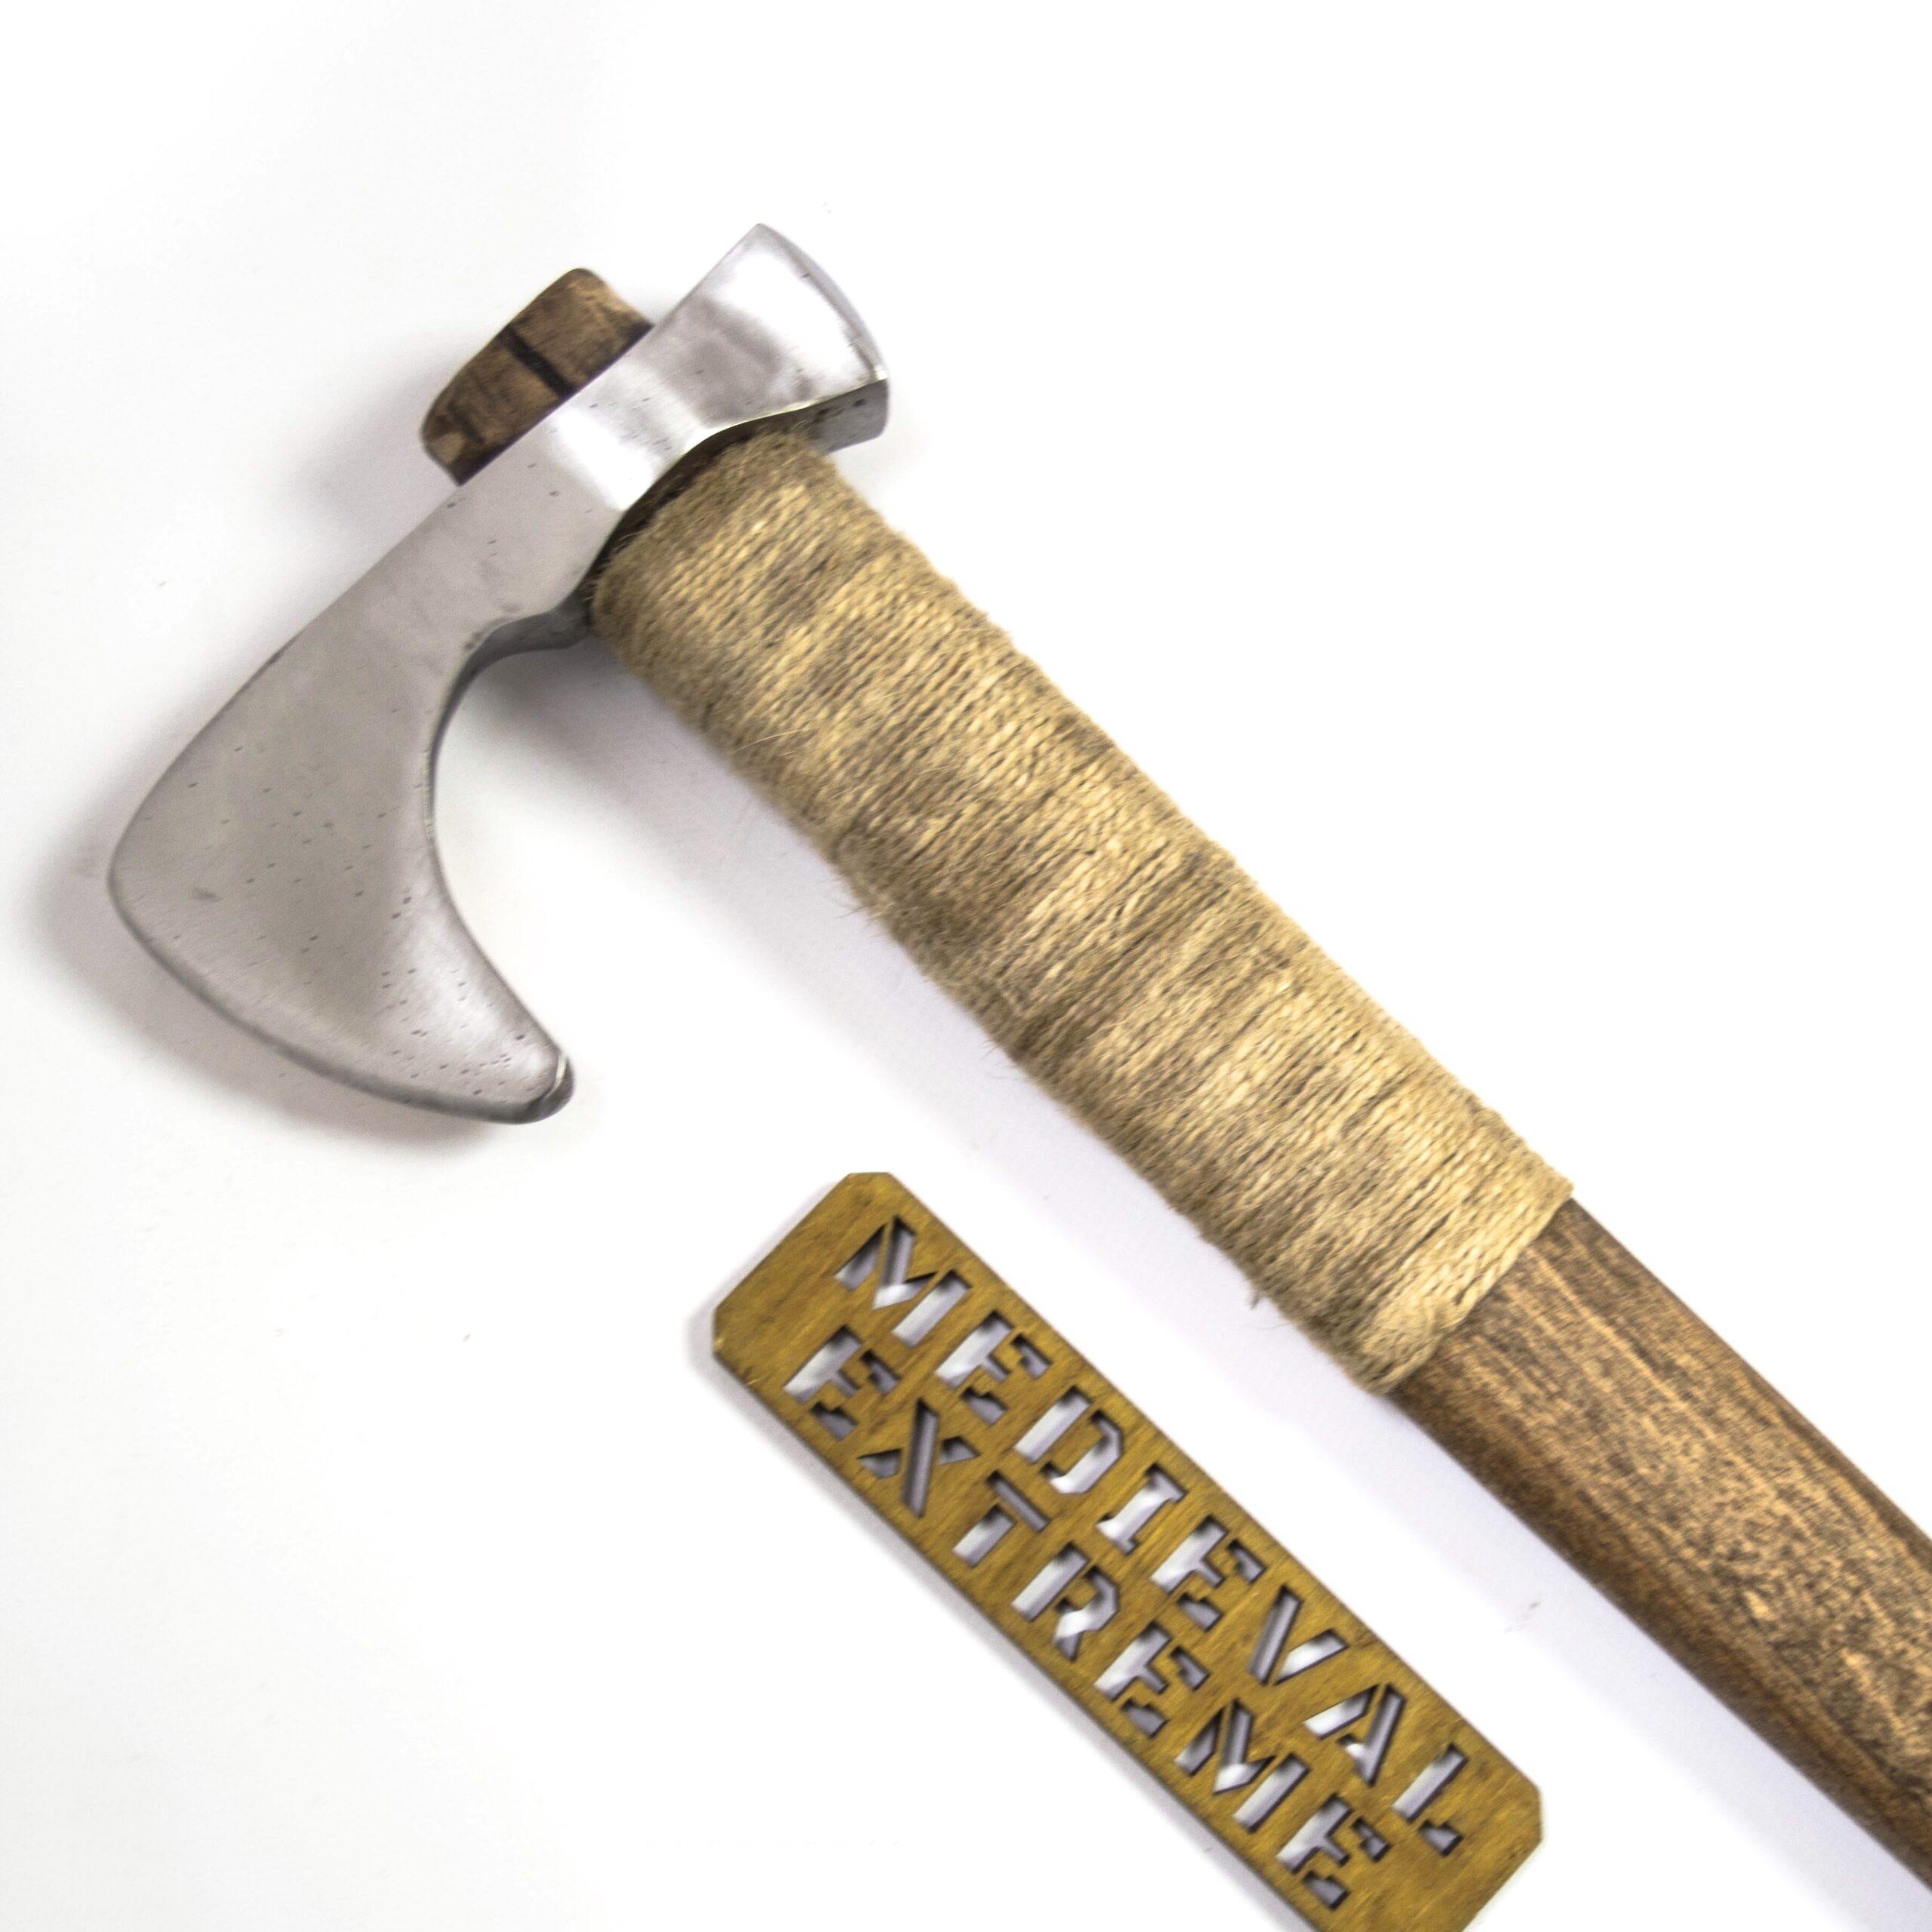  One  handed  axe  for HMB limited edition  Medieval Extreme